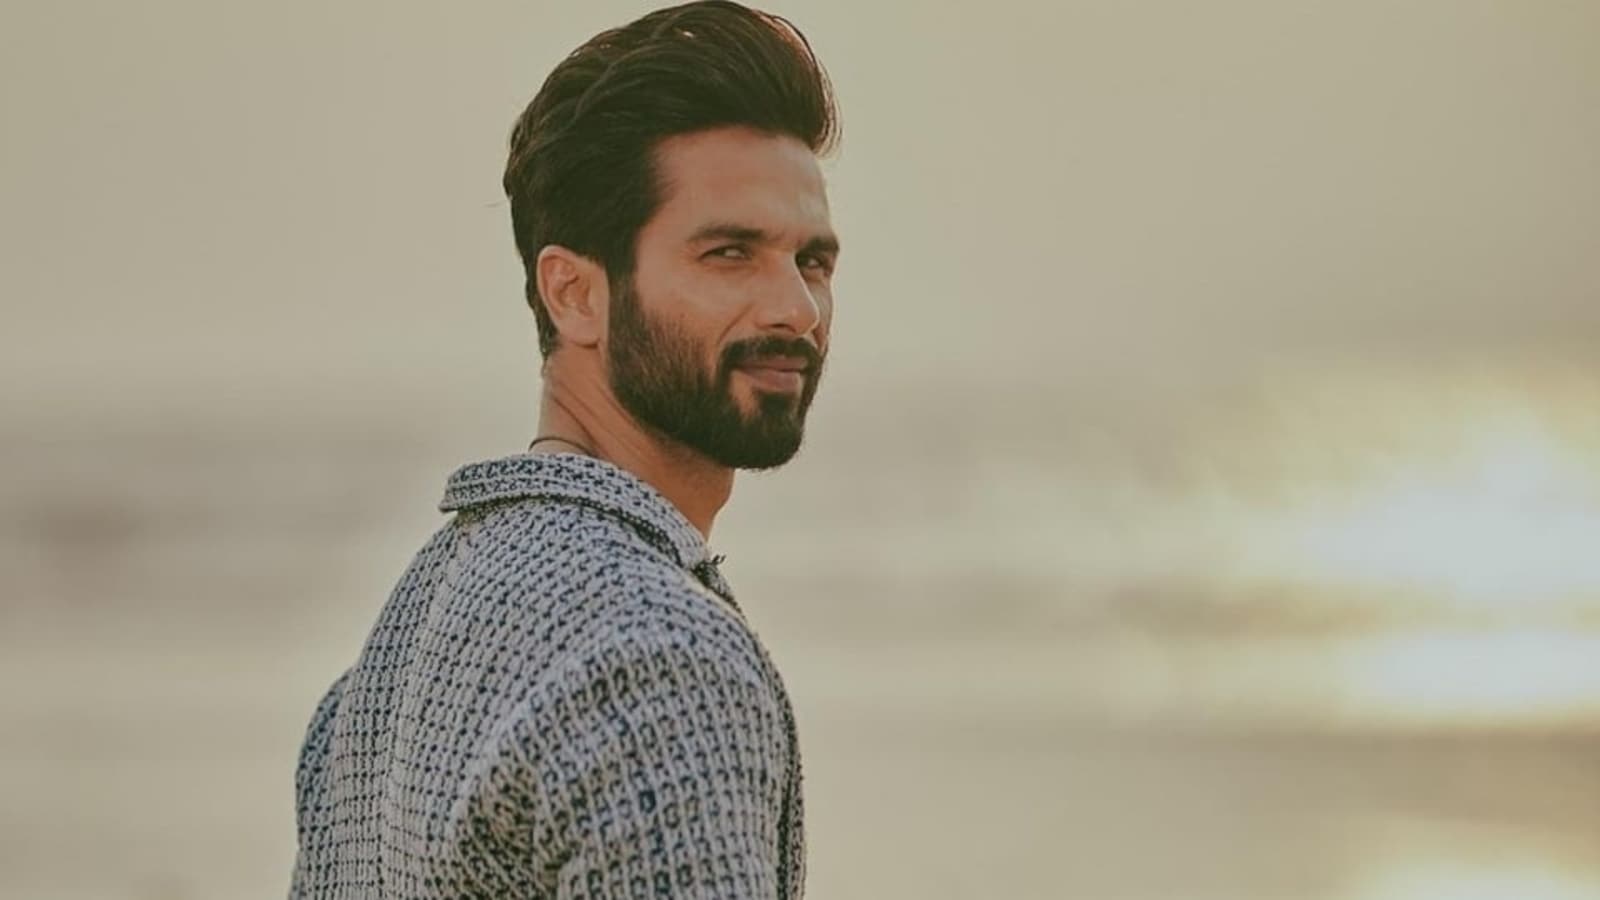 Shahid Kapoor claims to being bullied, treated badly in Mumbai ...